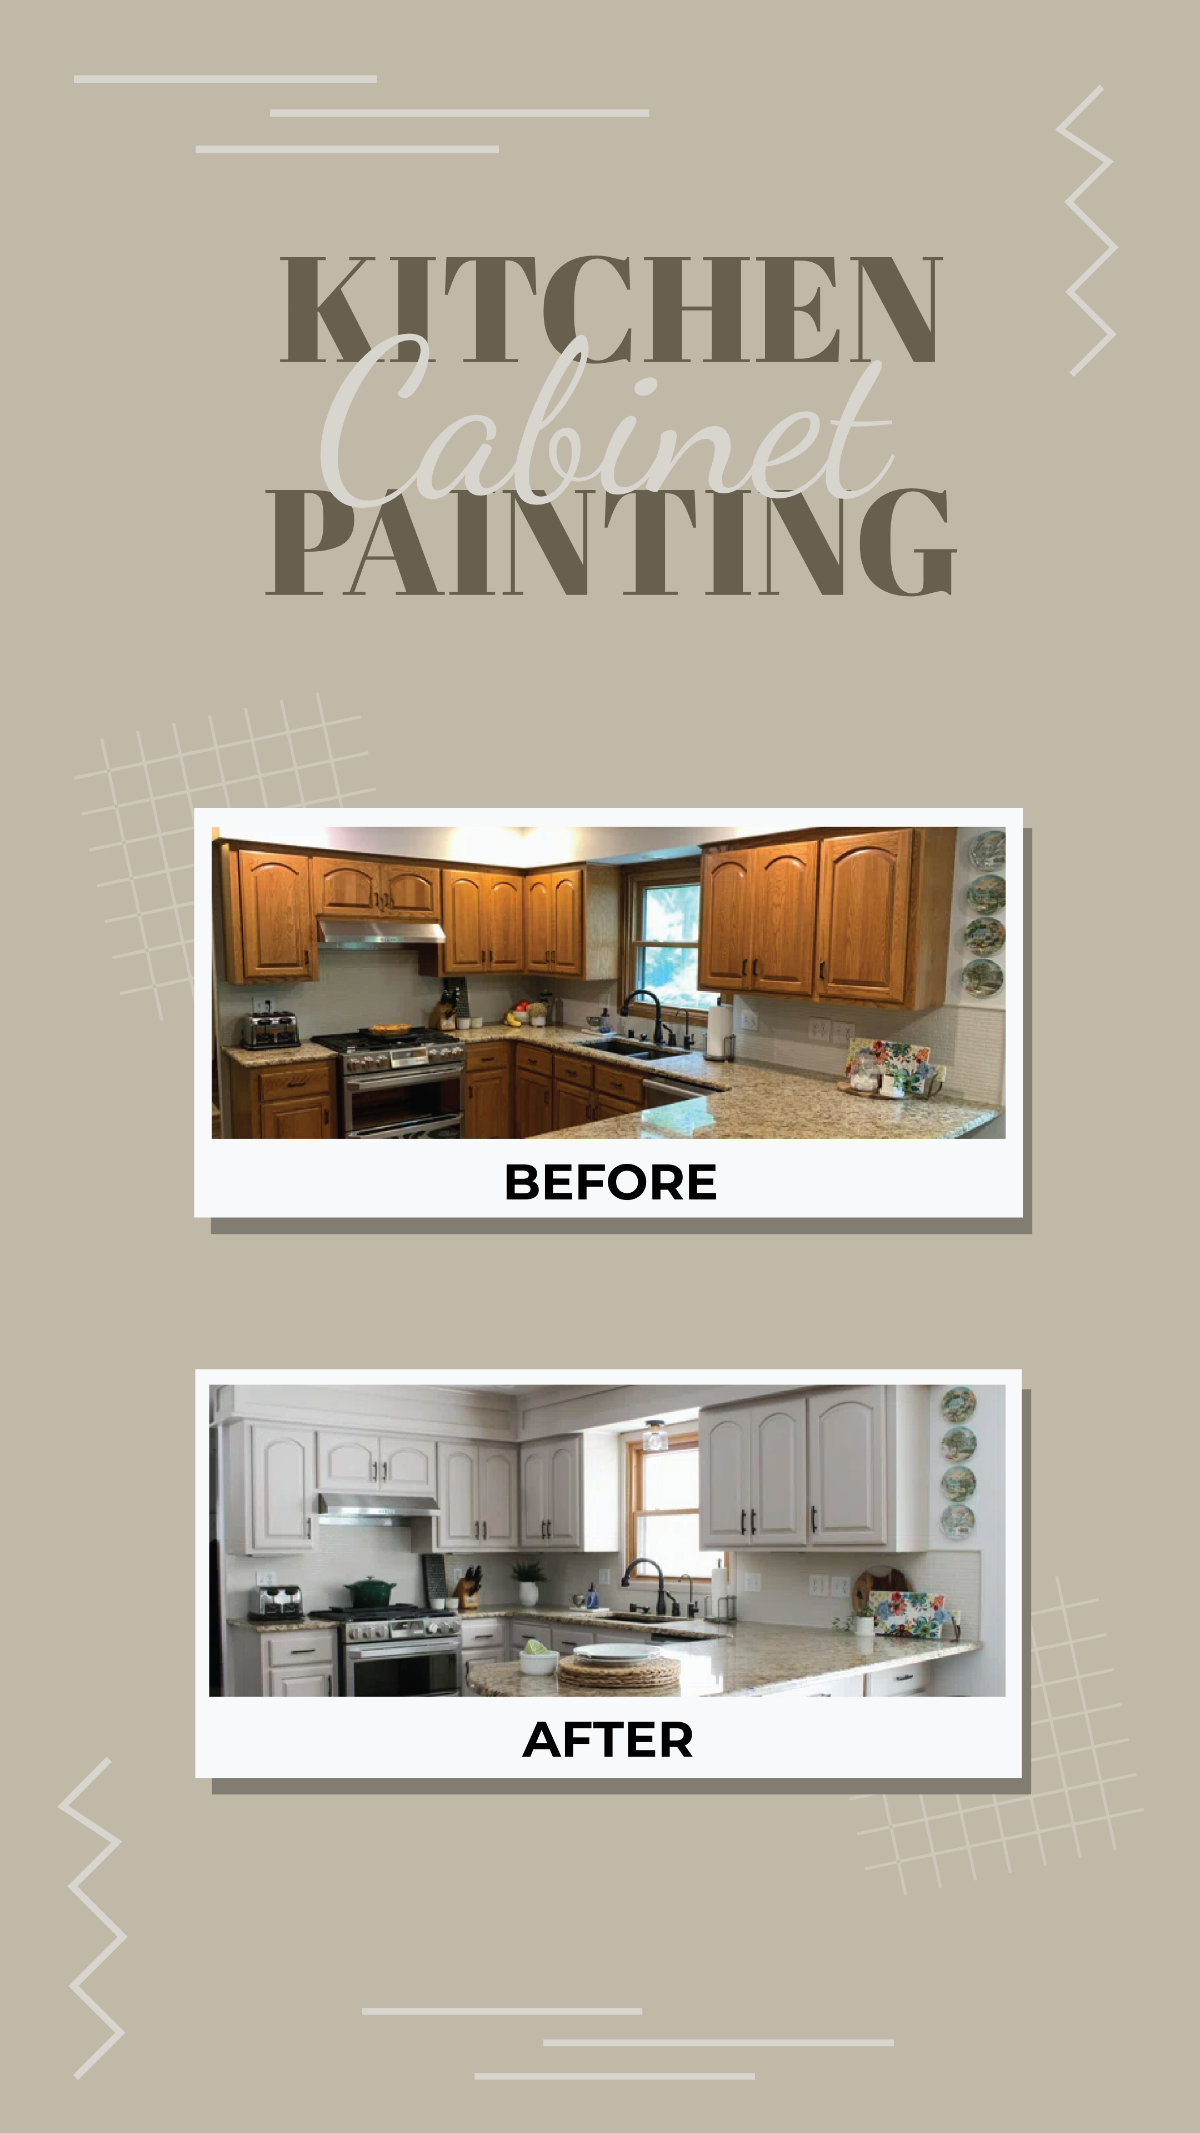 Kitchen Cabinet Painting Before and After Facebook Post